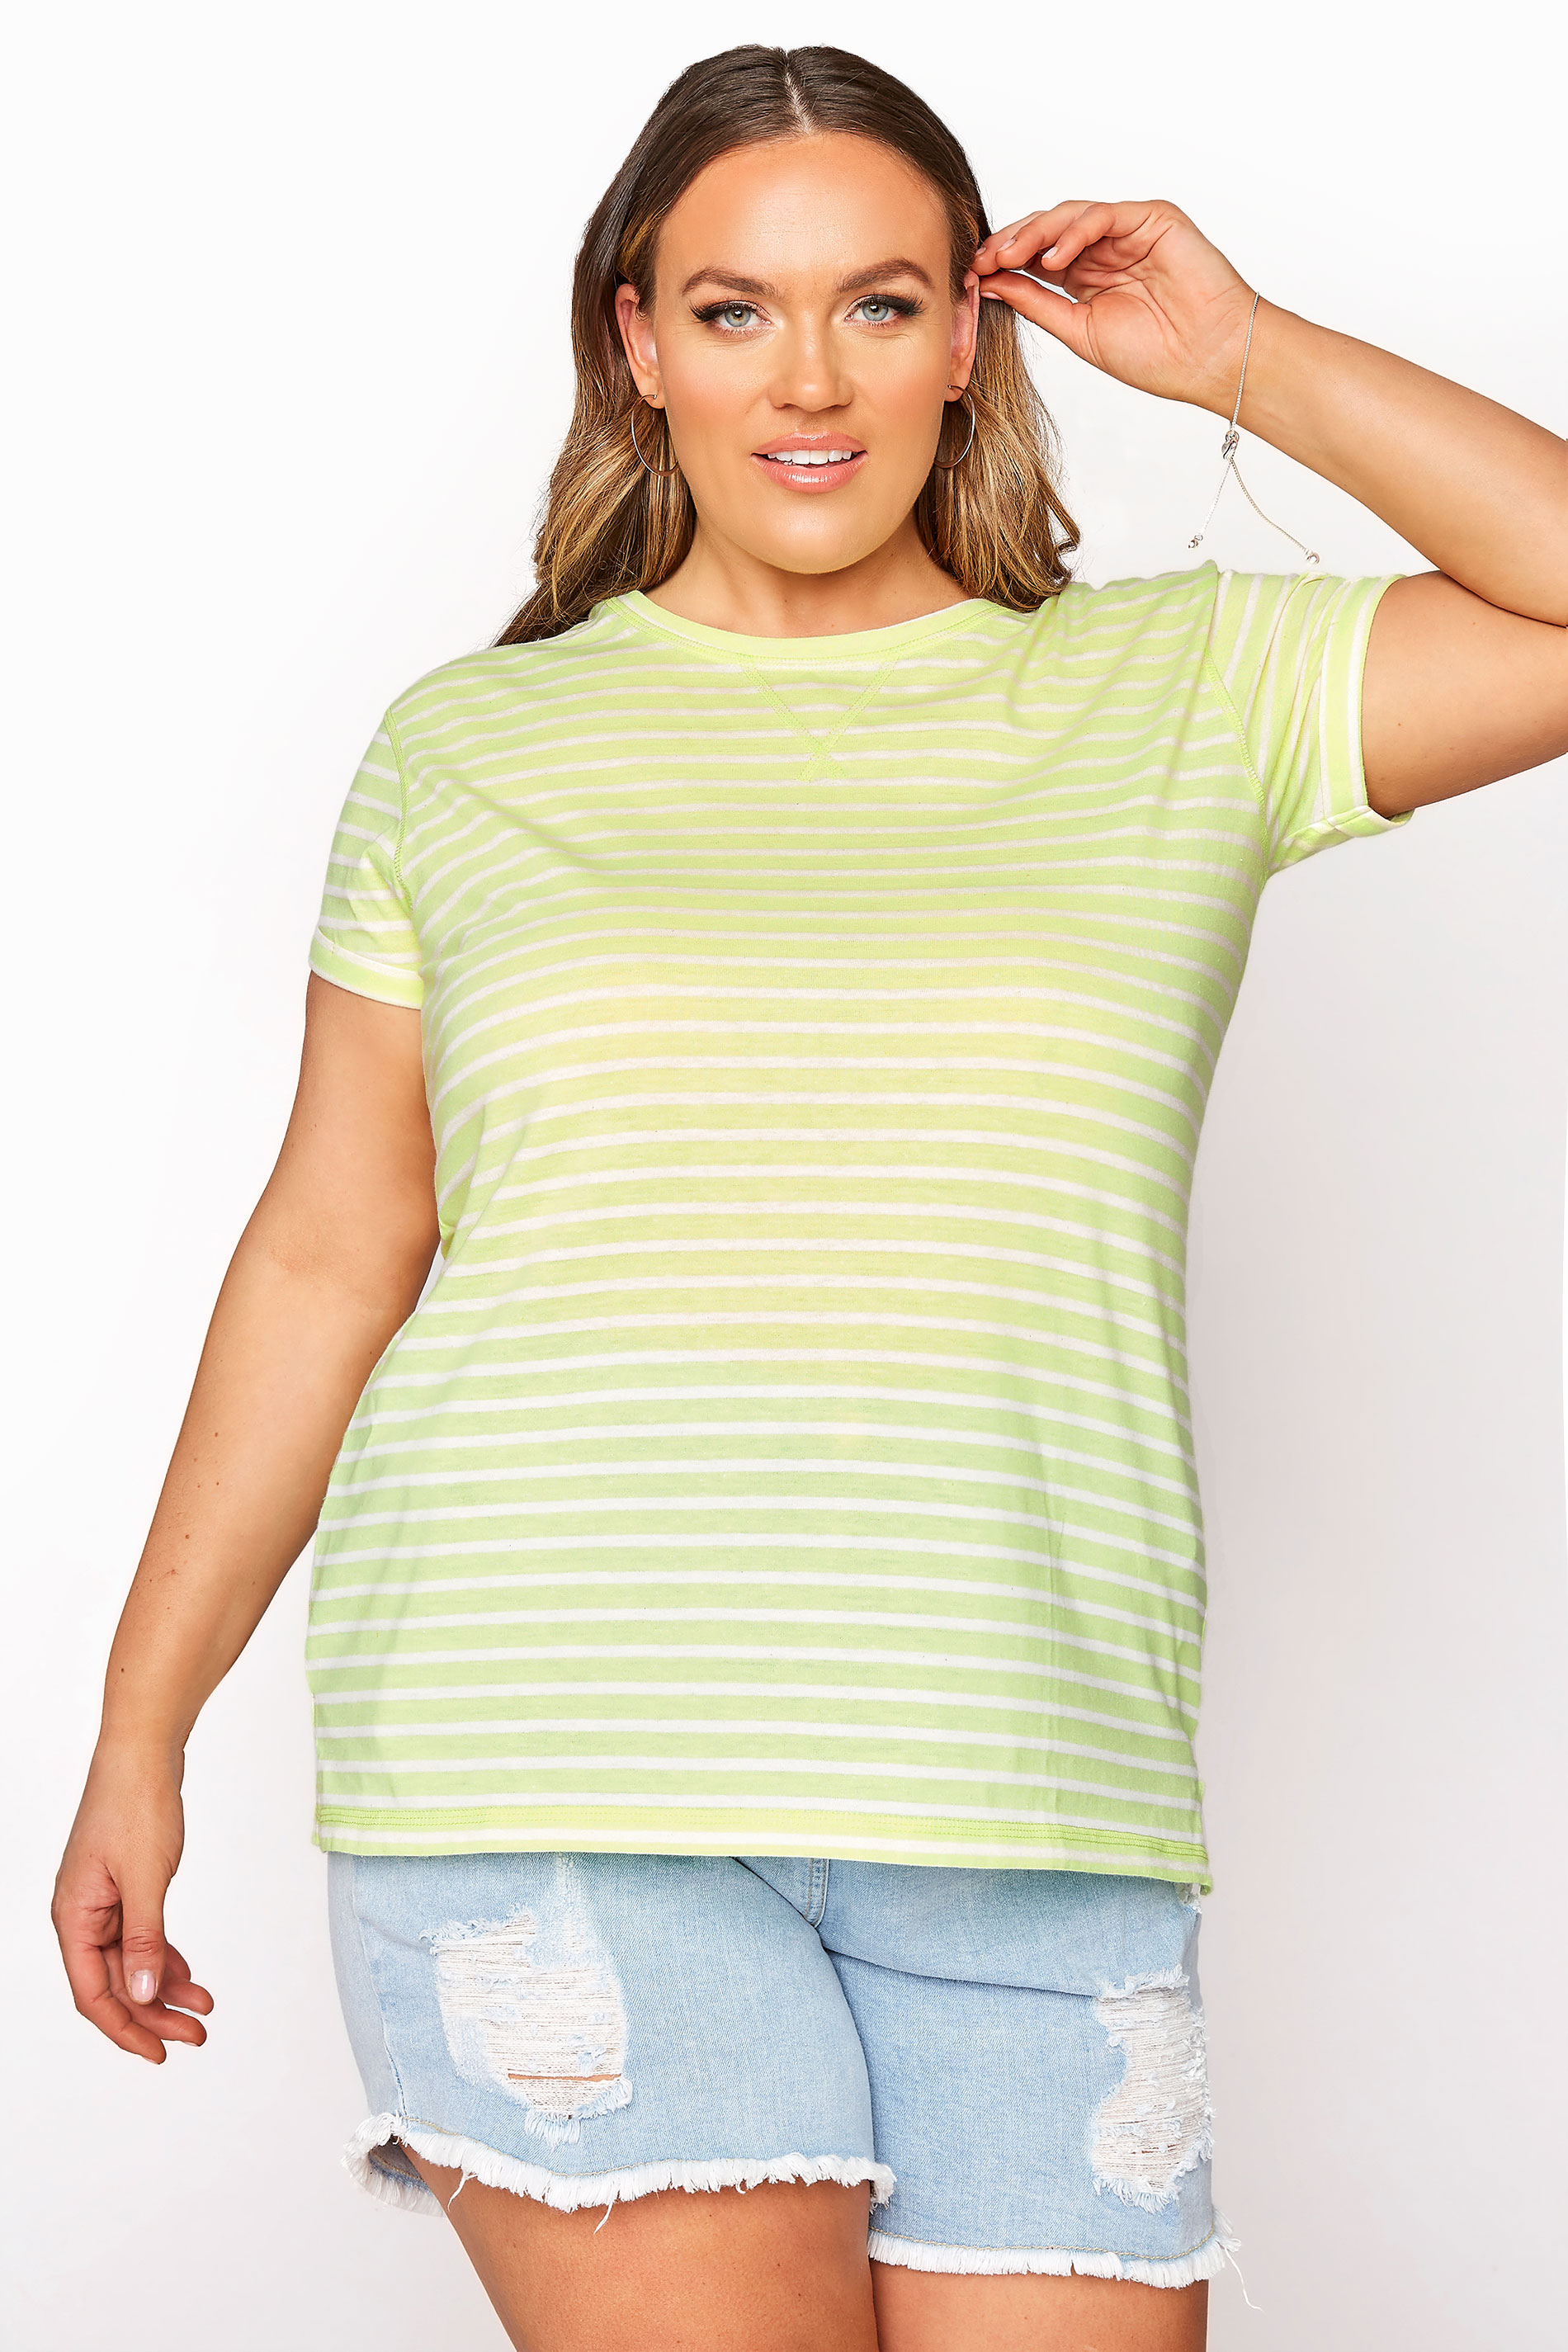 Grande taille  Tops Grande taille  Tops Jersey | T-Shirt Jaune Flashy Imprimé Rayures - US64411